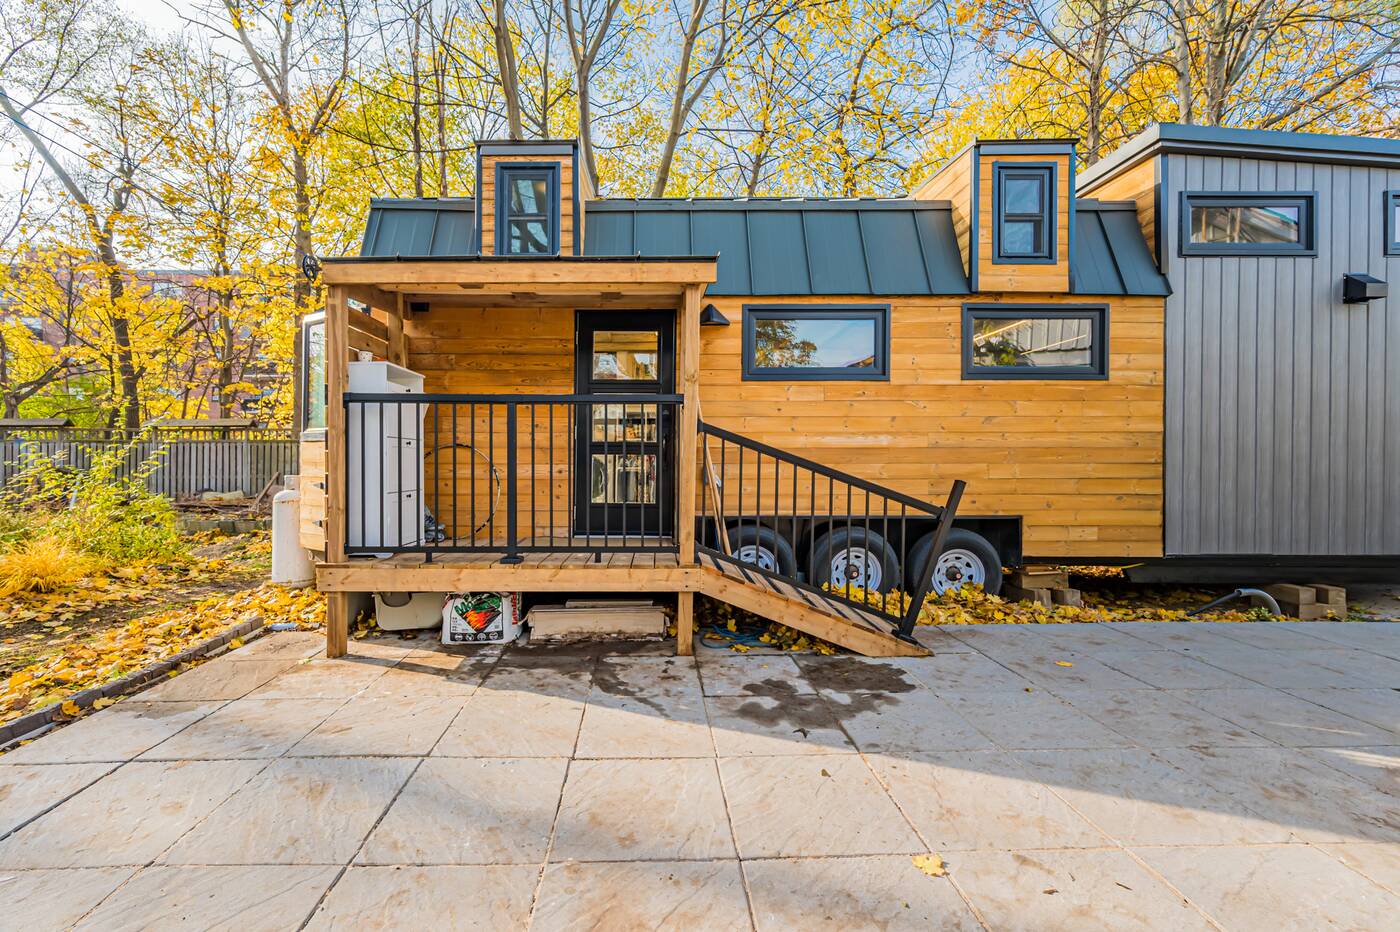 This is what life is like in a tiny home near Toronto